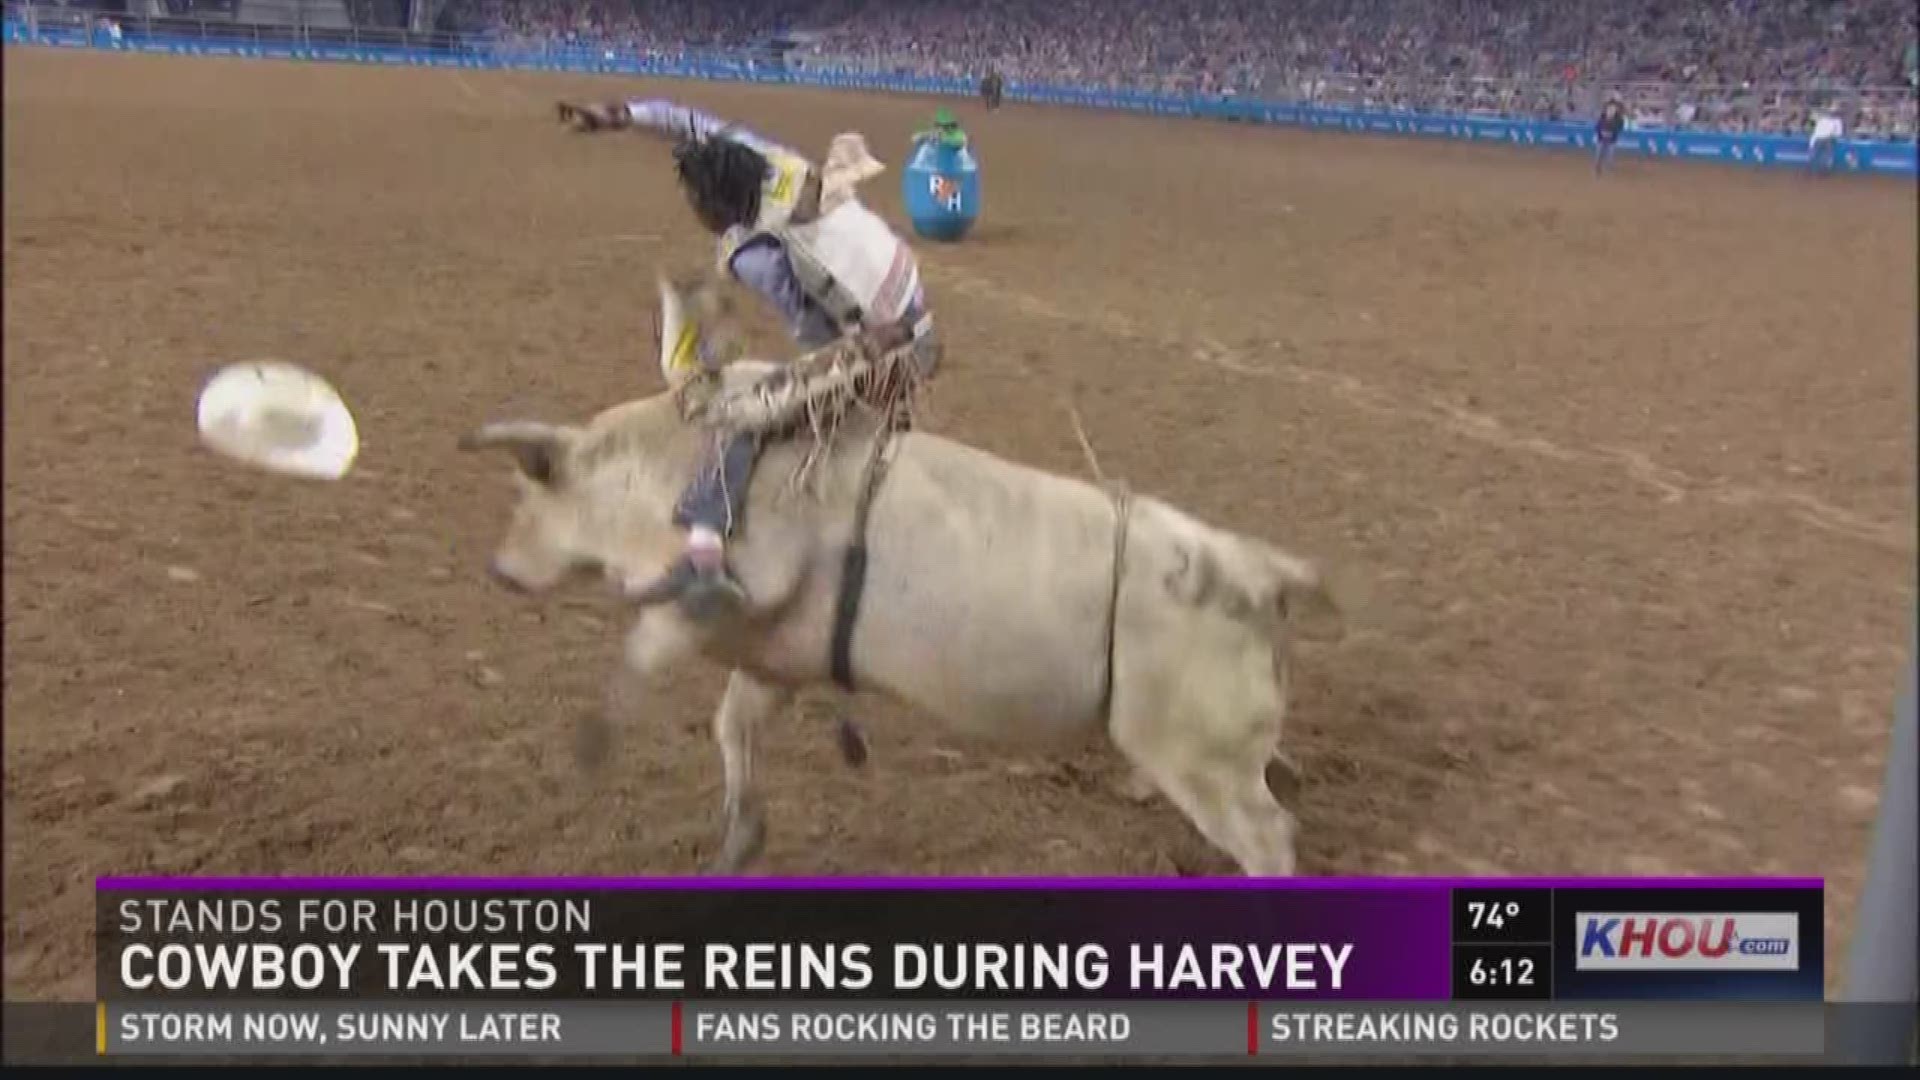 A professional bull rider is doing his best to become the champion at this year's RodeoHouston. But he's already a champ for his actions during Hurricane Harvey.  Neil Holmes is from Cleveland, Texas. He gets the local crowd cheering loudly when he perfor